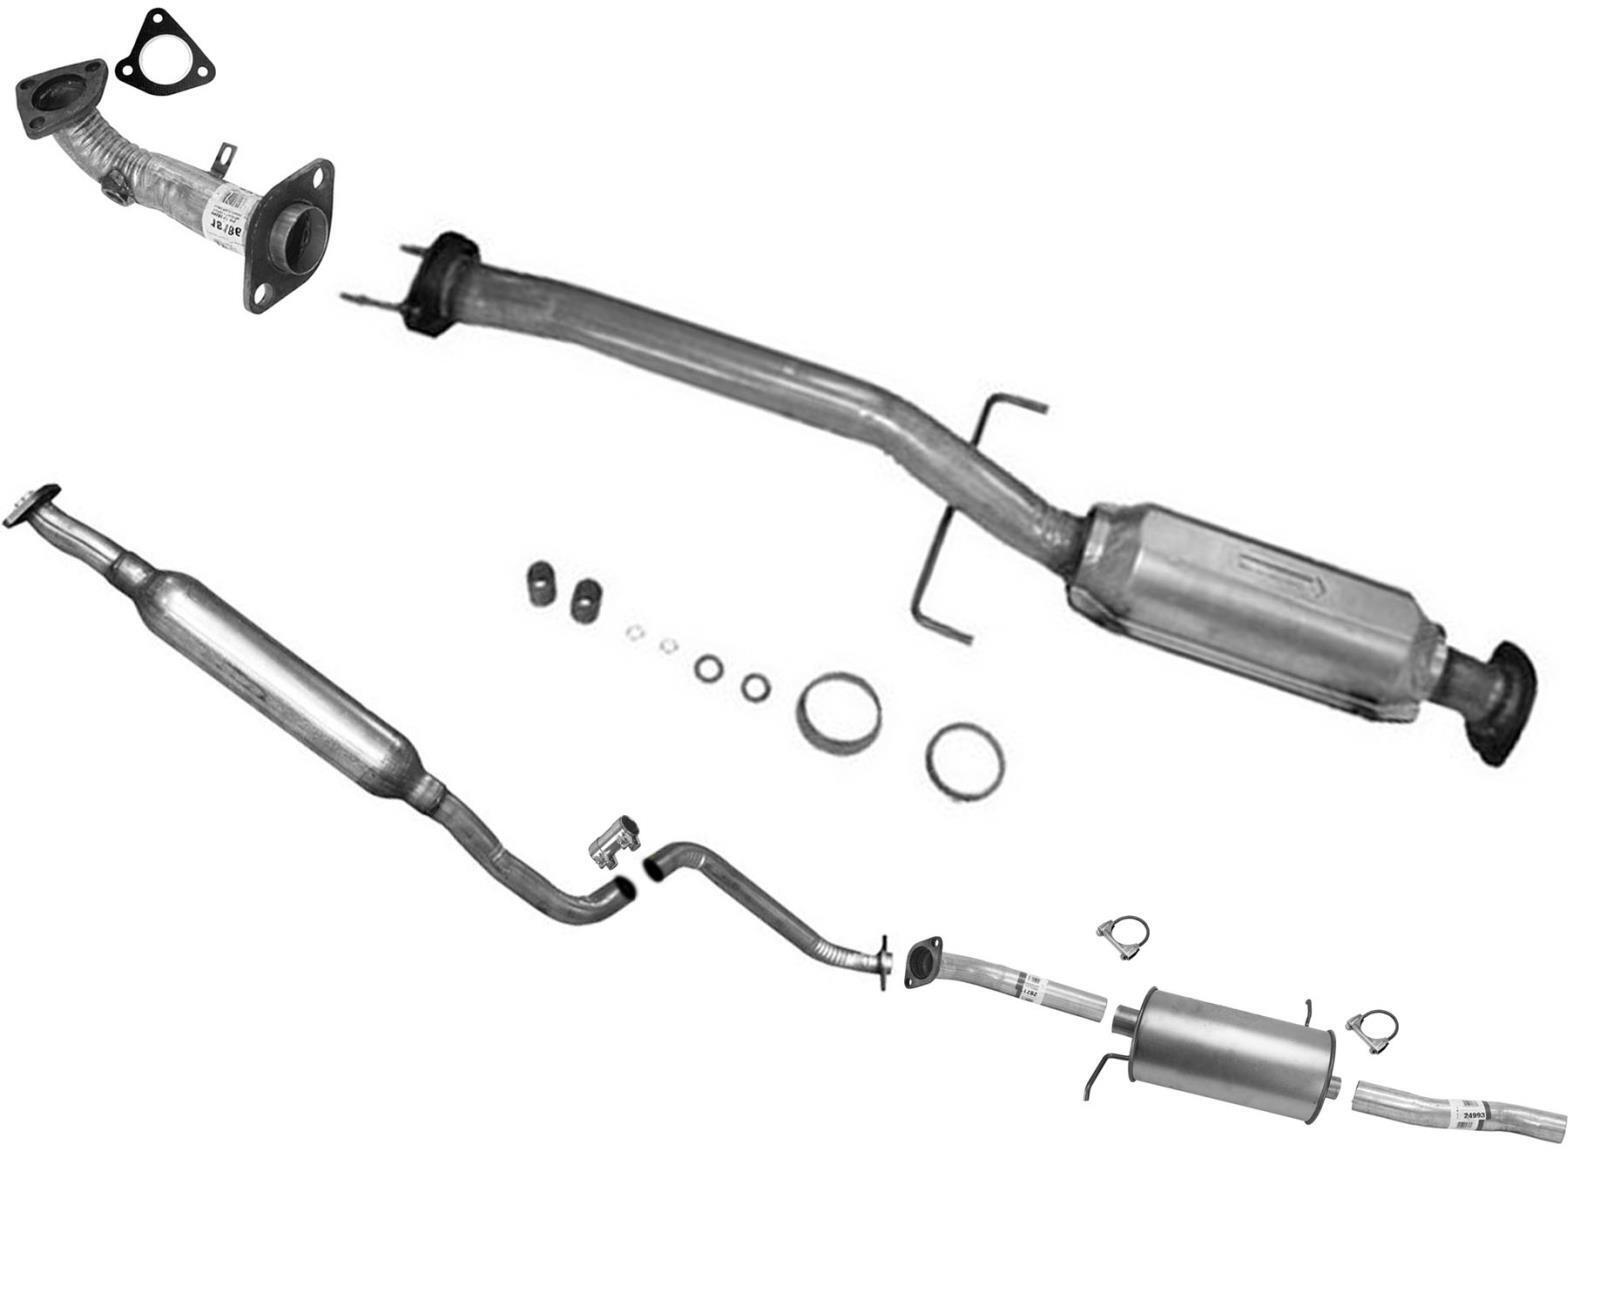 Fits Pro date 03/13/02-03 Protege 5 2.0L Converter Muffler Exhaust Pipe System